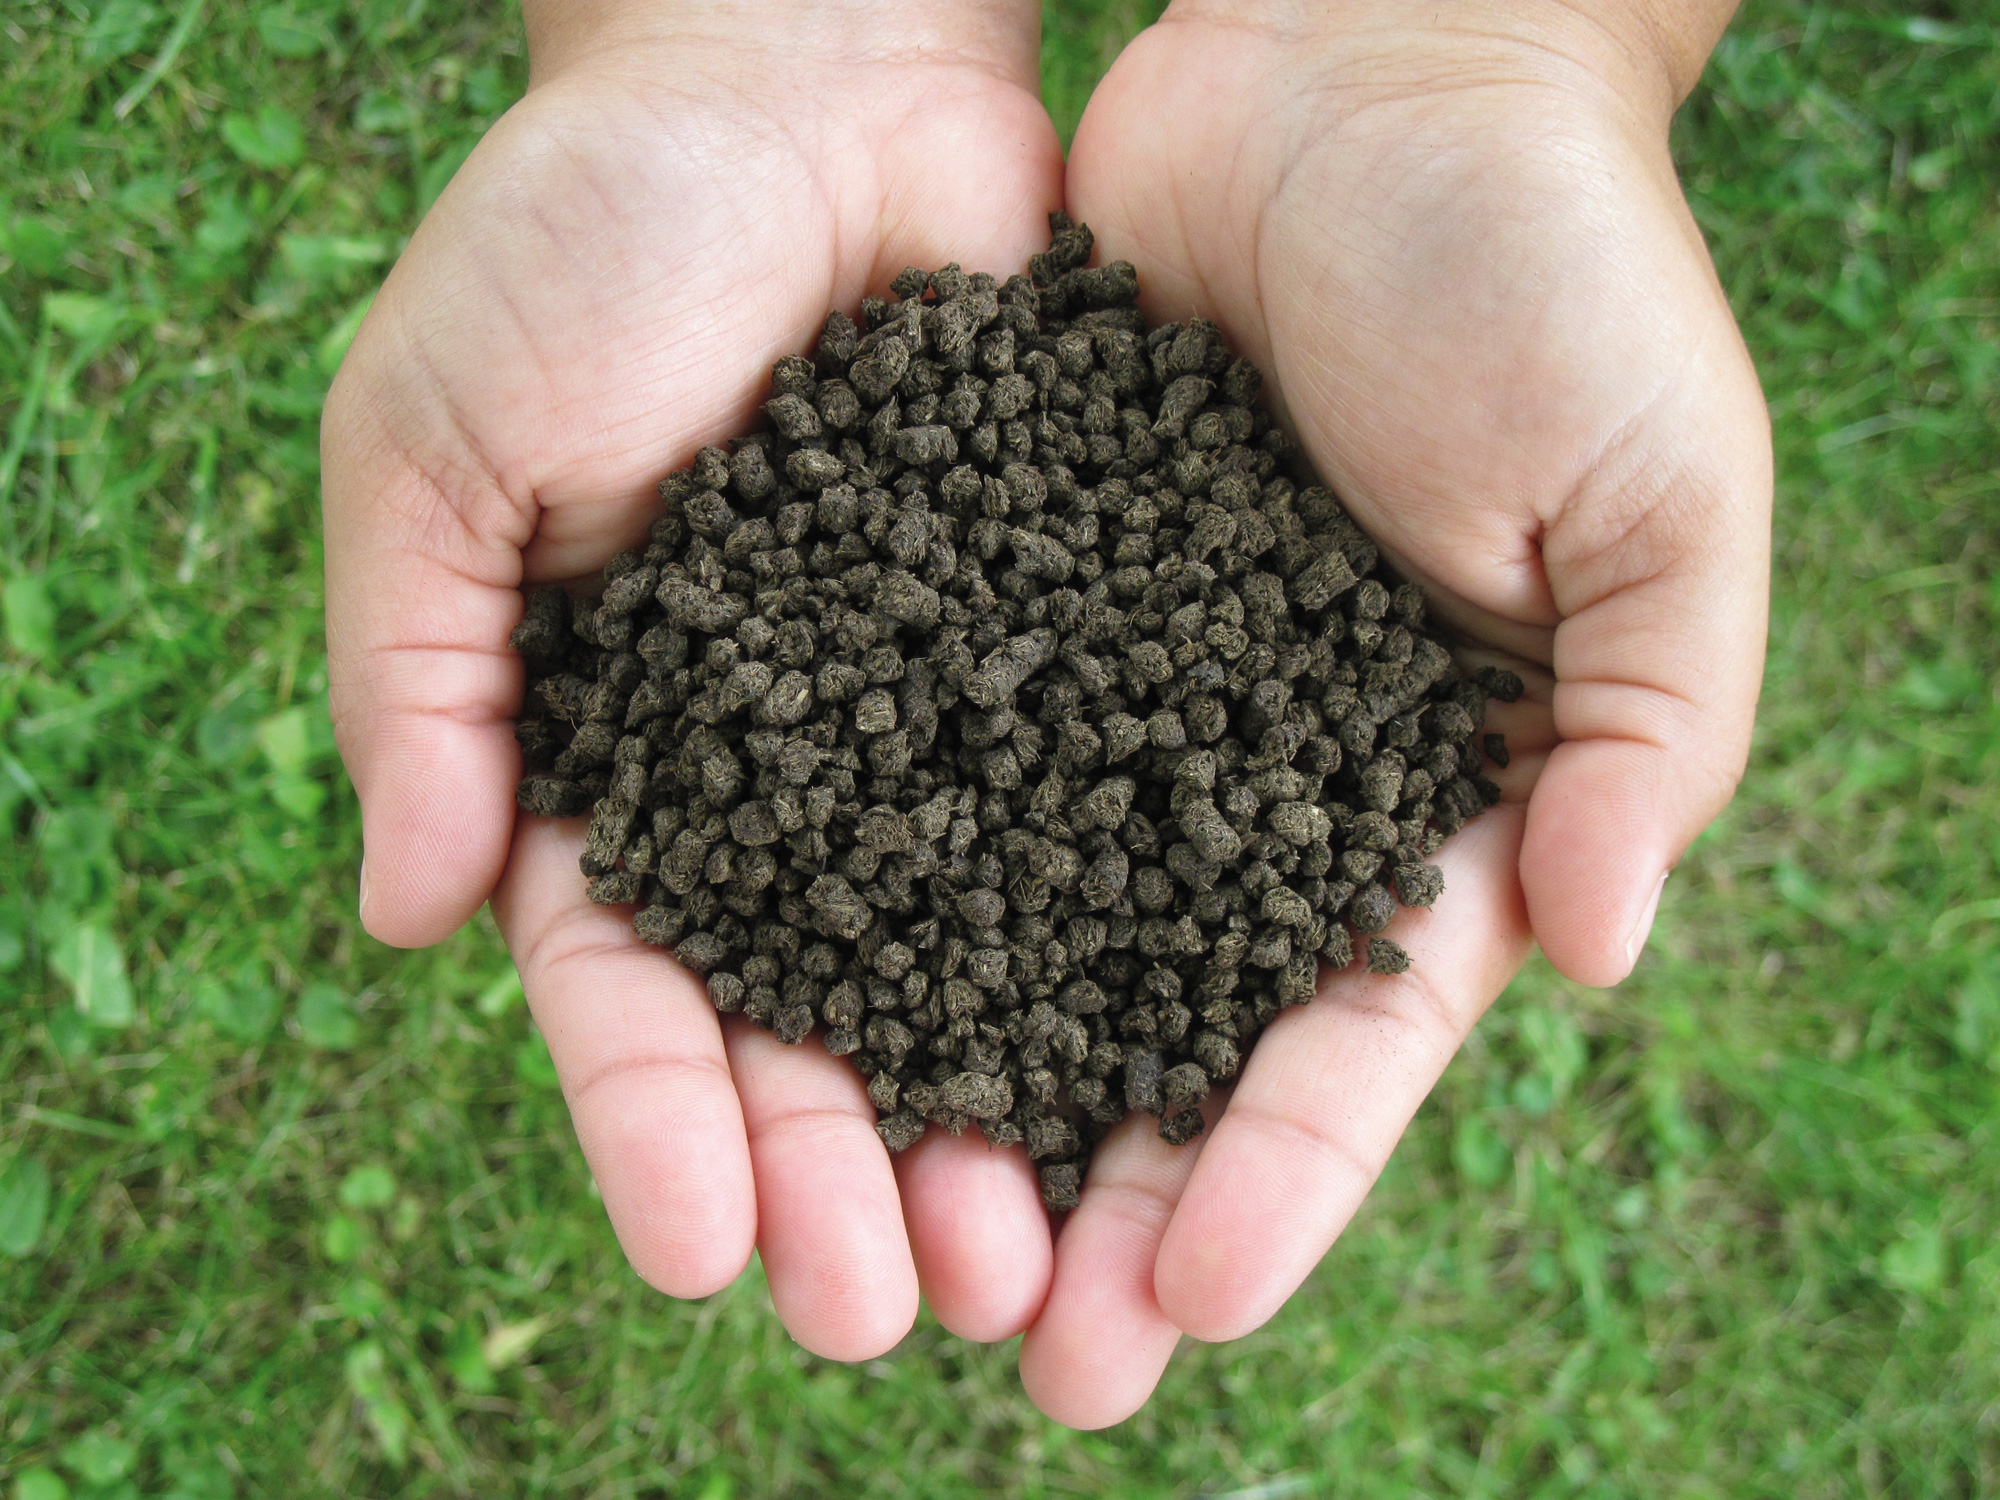 Fertilizer and biological pest repellent all in one: EcoBug pellets, made from the residues of cow manure fermentation enriched with cyanobacteria.